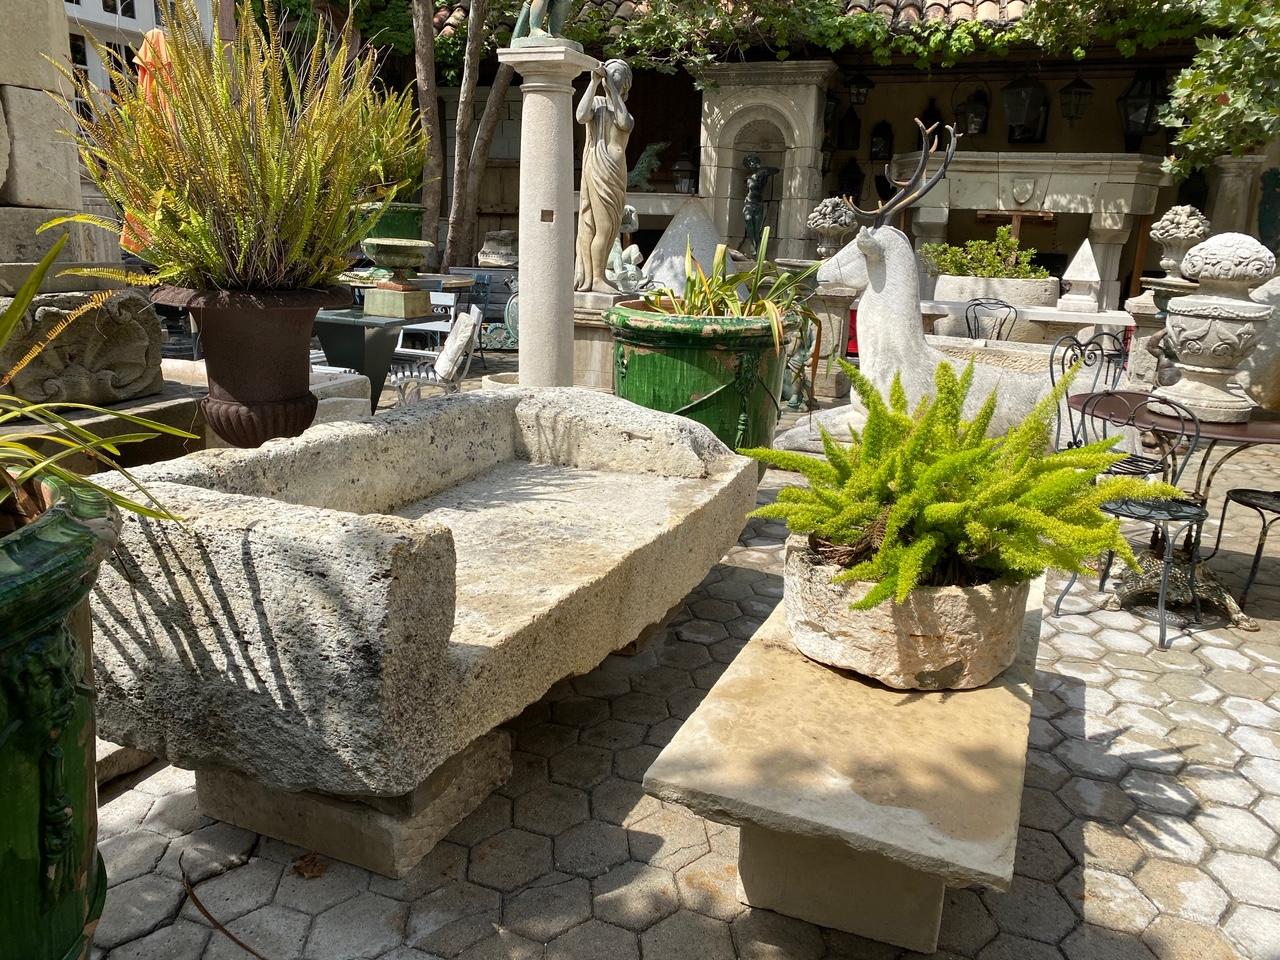 17th century hand carved garden stone bench. No pedestals or bases instead to mount it in place as the example. This rustic beauty is a rare piece indeed A beautiful garden bench simple lines that works in an interior as a seating or decorative